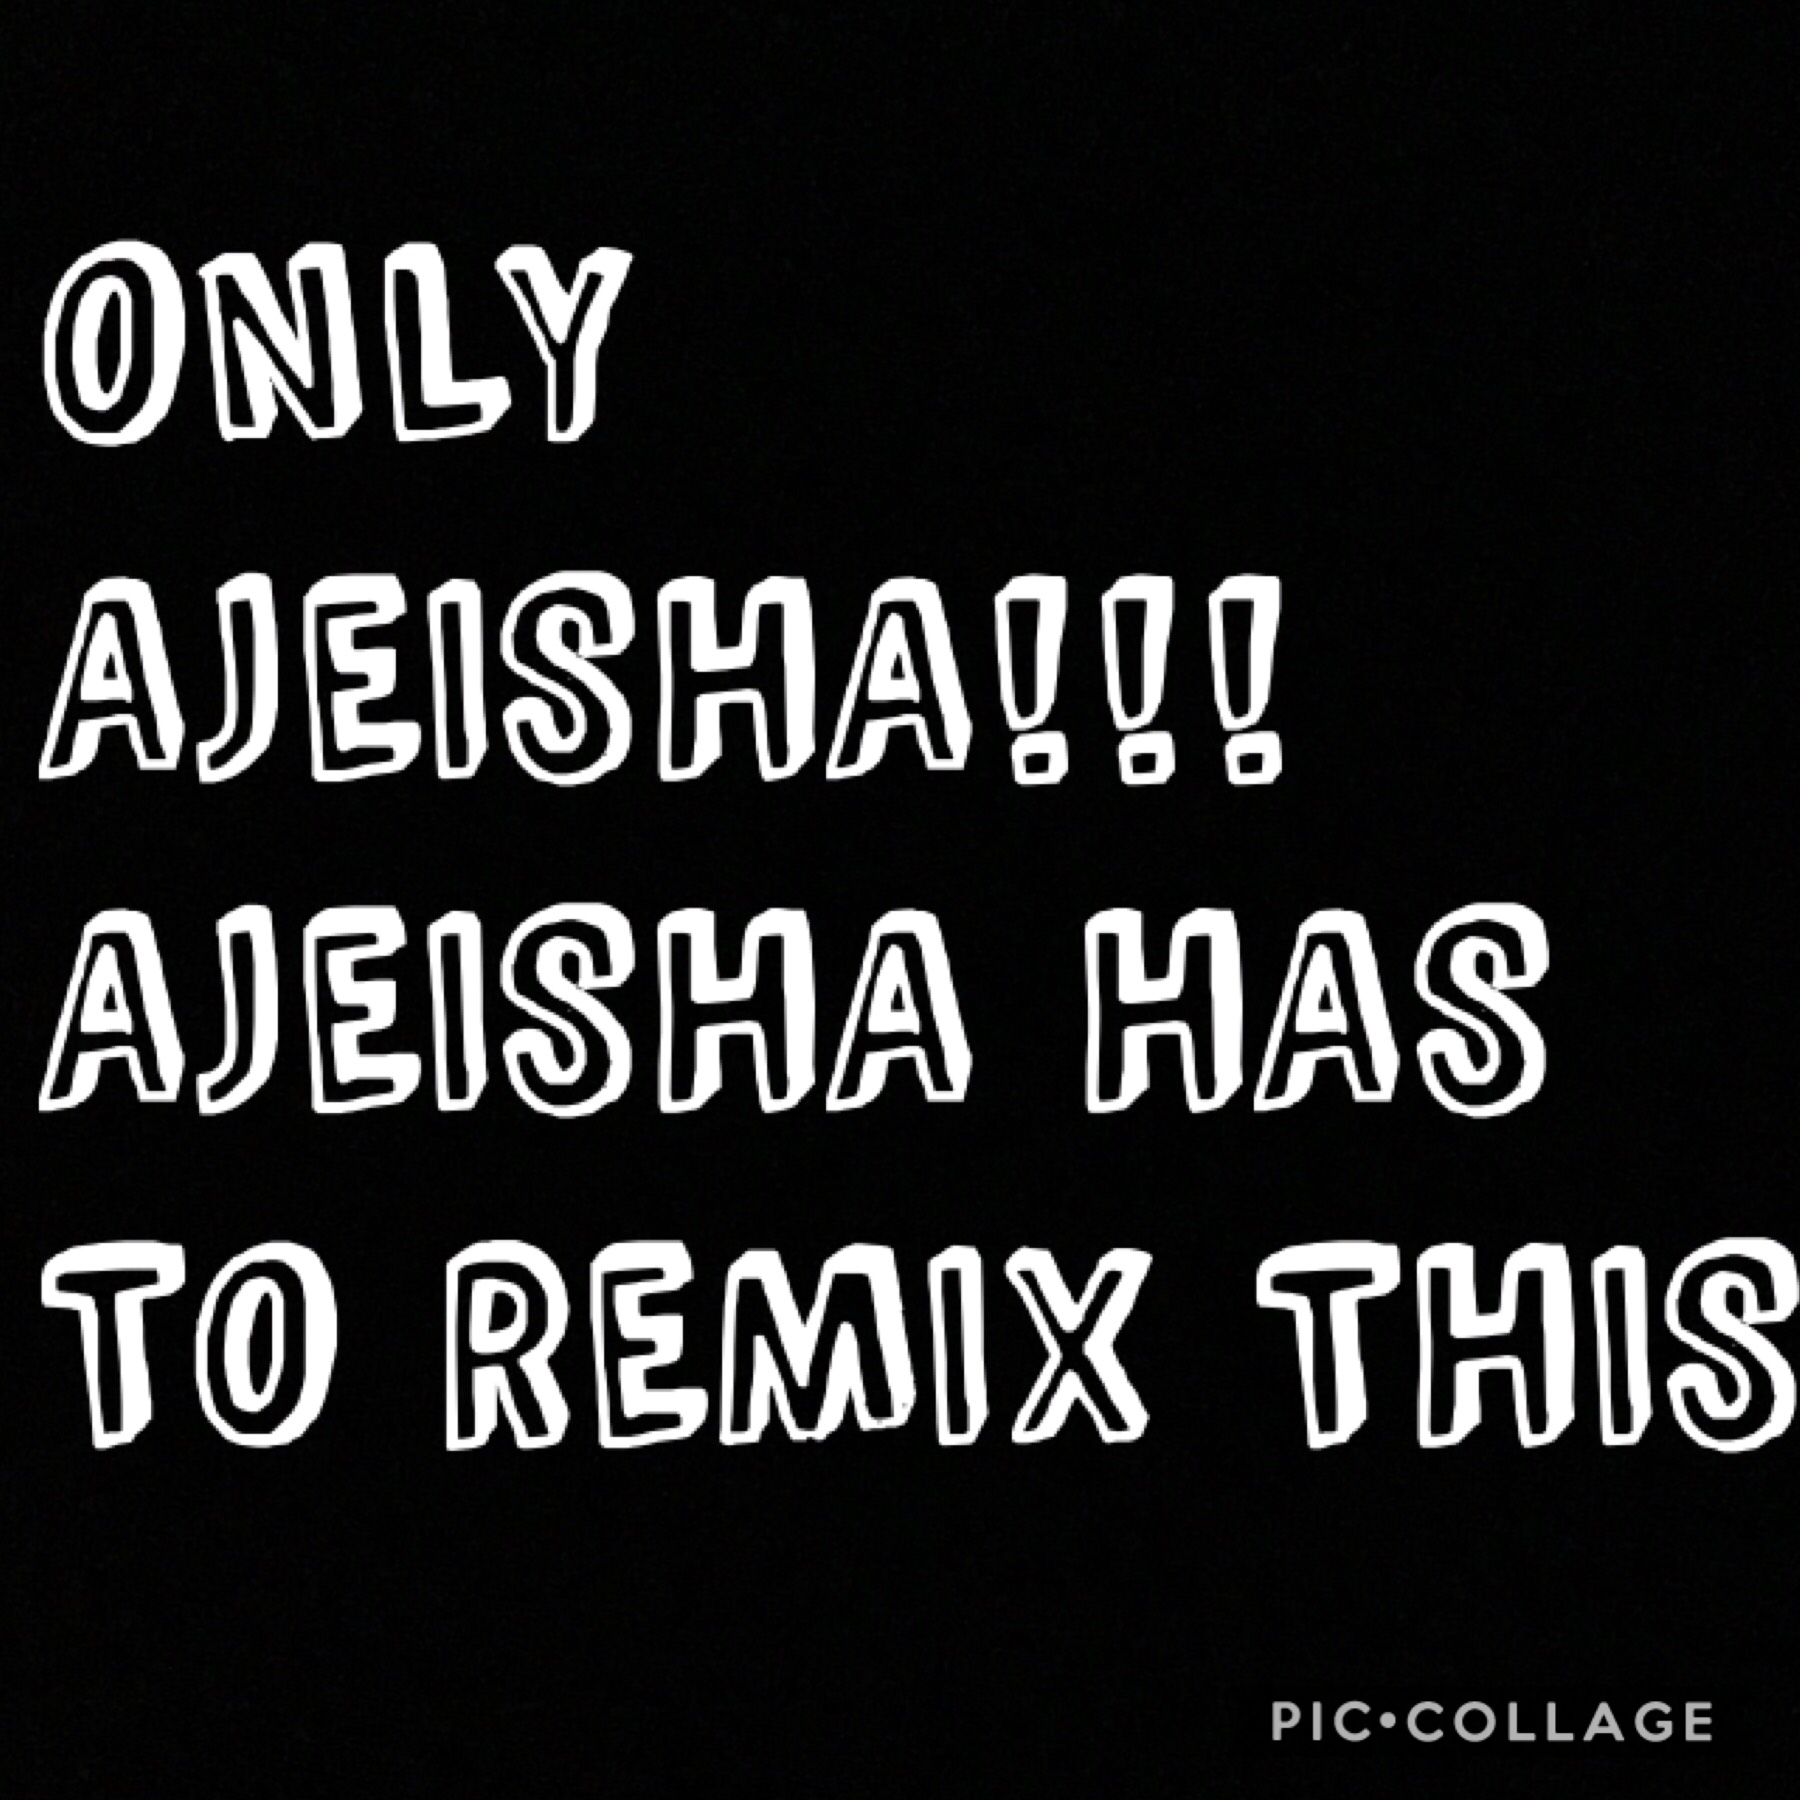 If I mean ajeisha remix this, it means AJEISHA REMIX THIS!!!!!!!